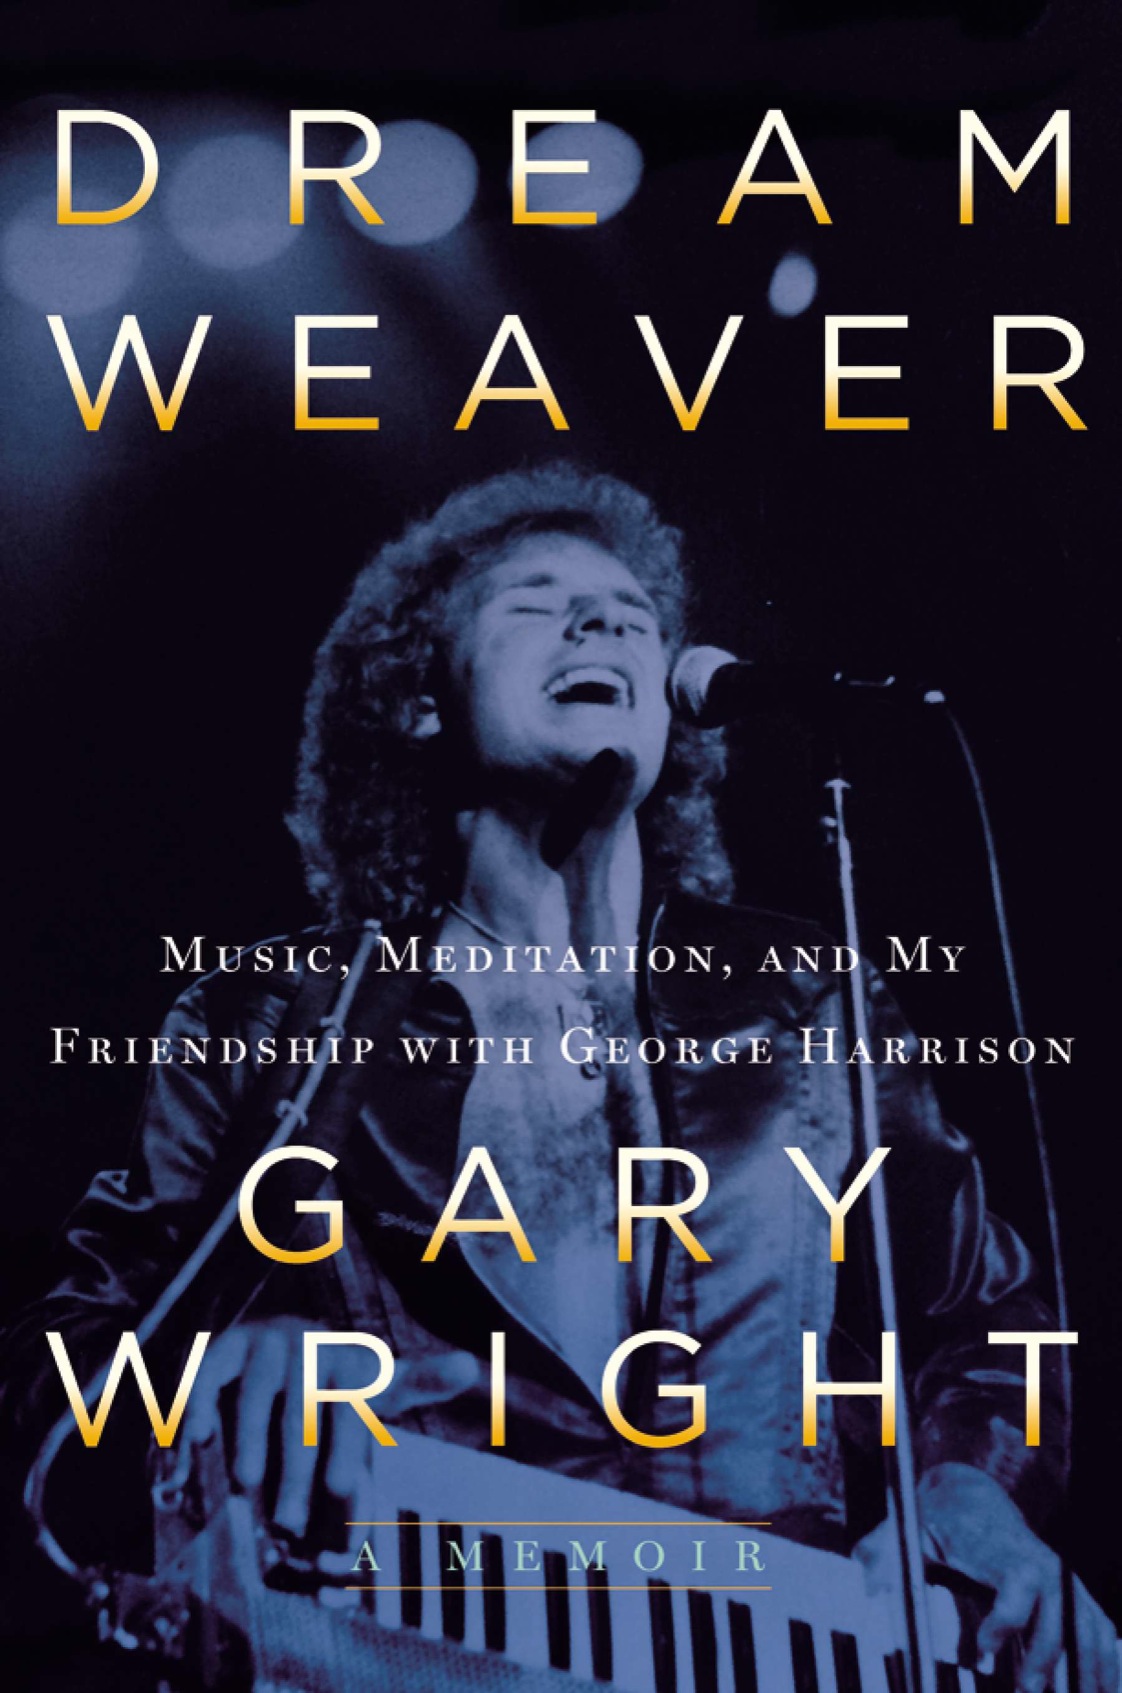 Dream weaver a memoir music meditation and my friendship with george harrison - image 1